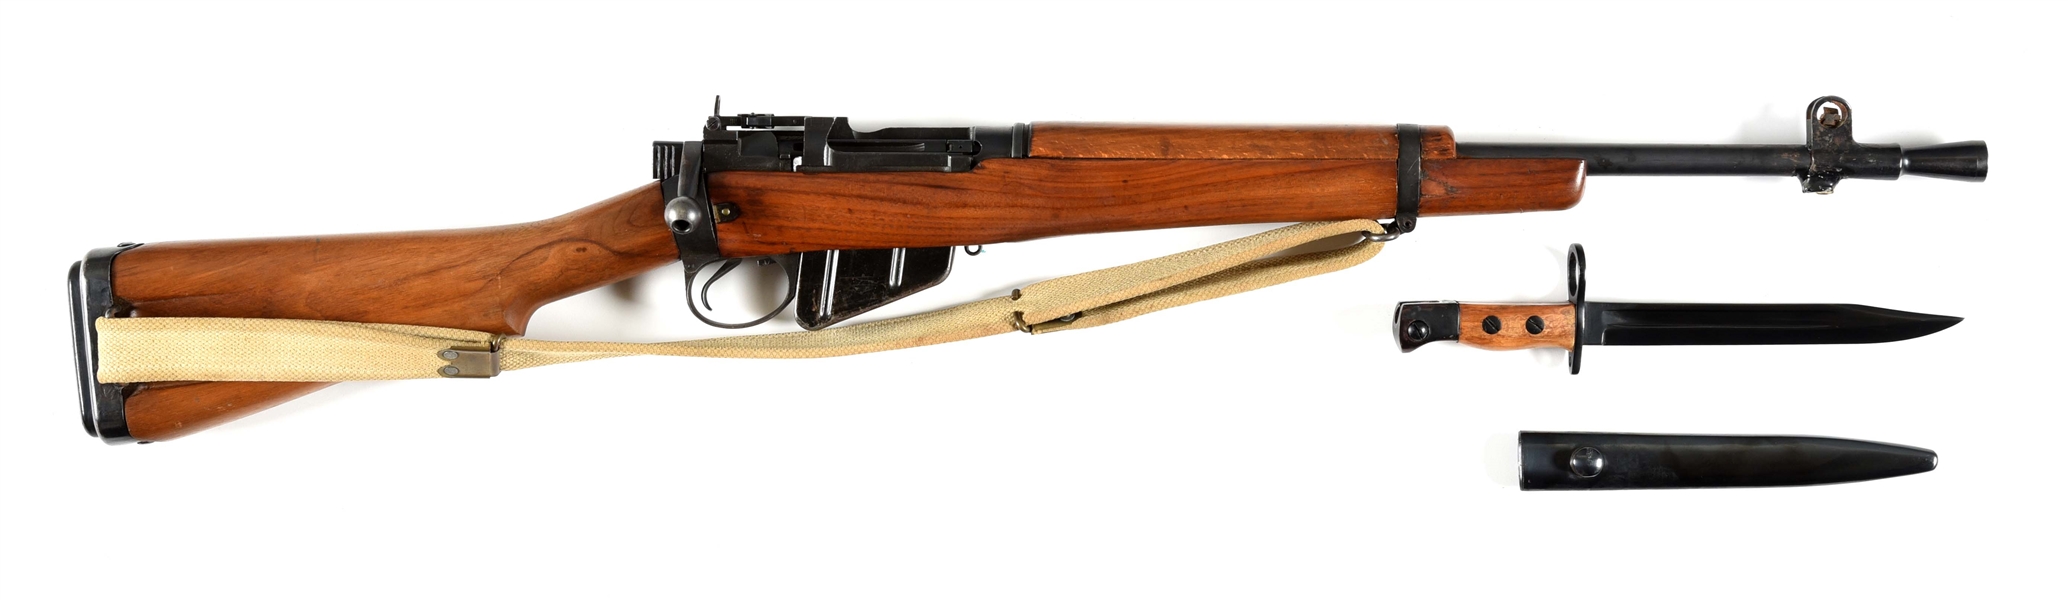 (C) GOLDEN STATE ARMS ENFIELD NO. 5 JUNGLE CARBINE. 